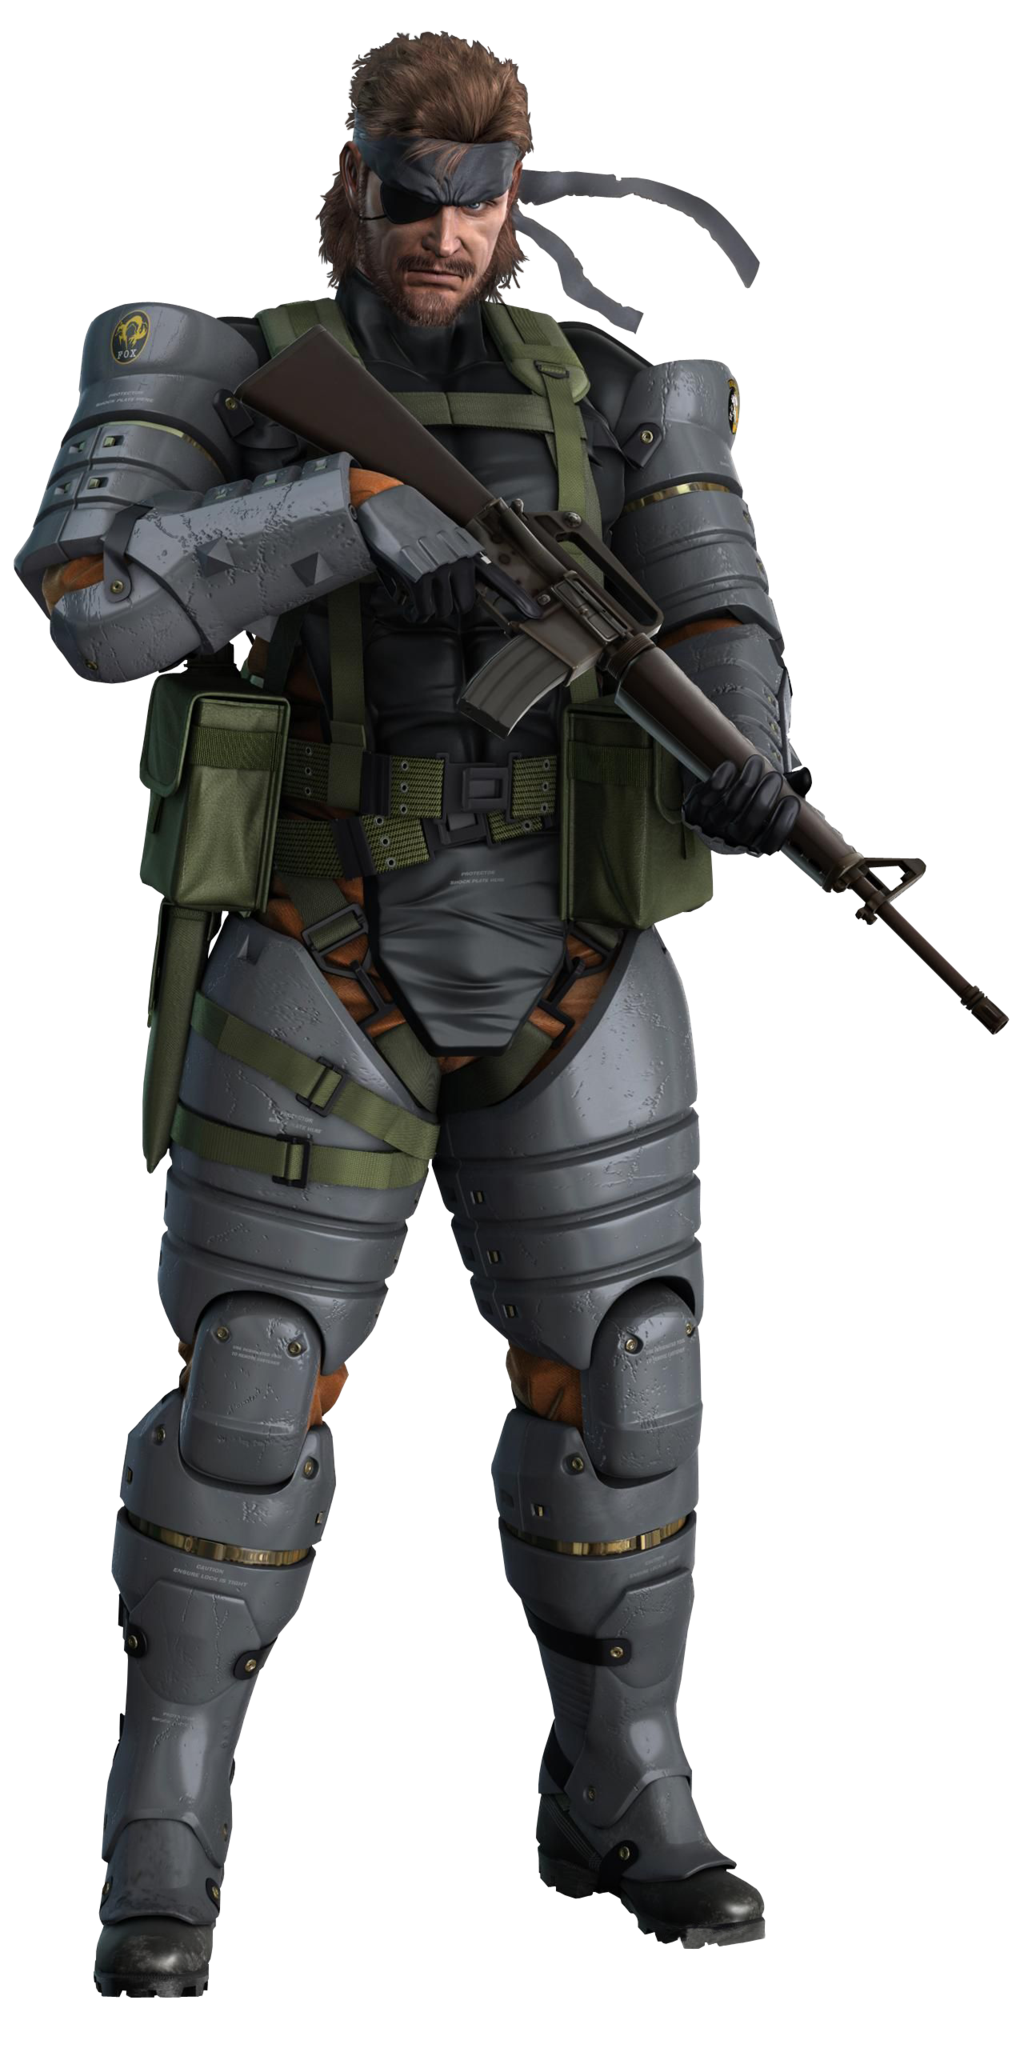 Solid Game Metal Gear Free Transparent Image HQ PNG Image